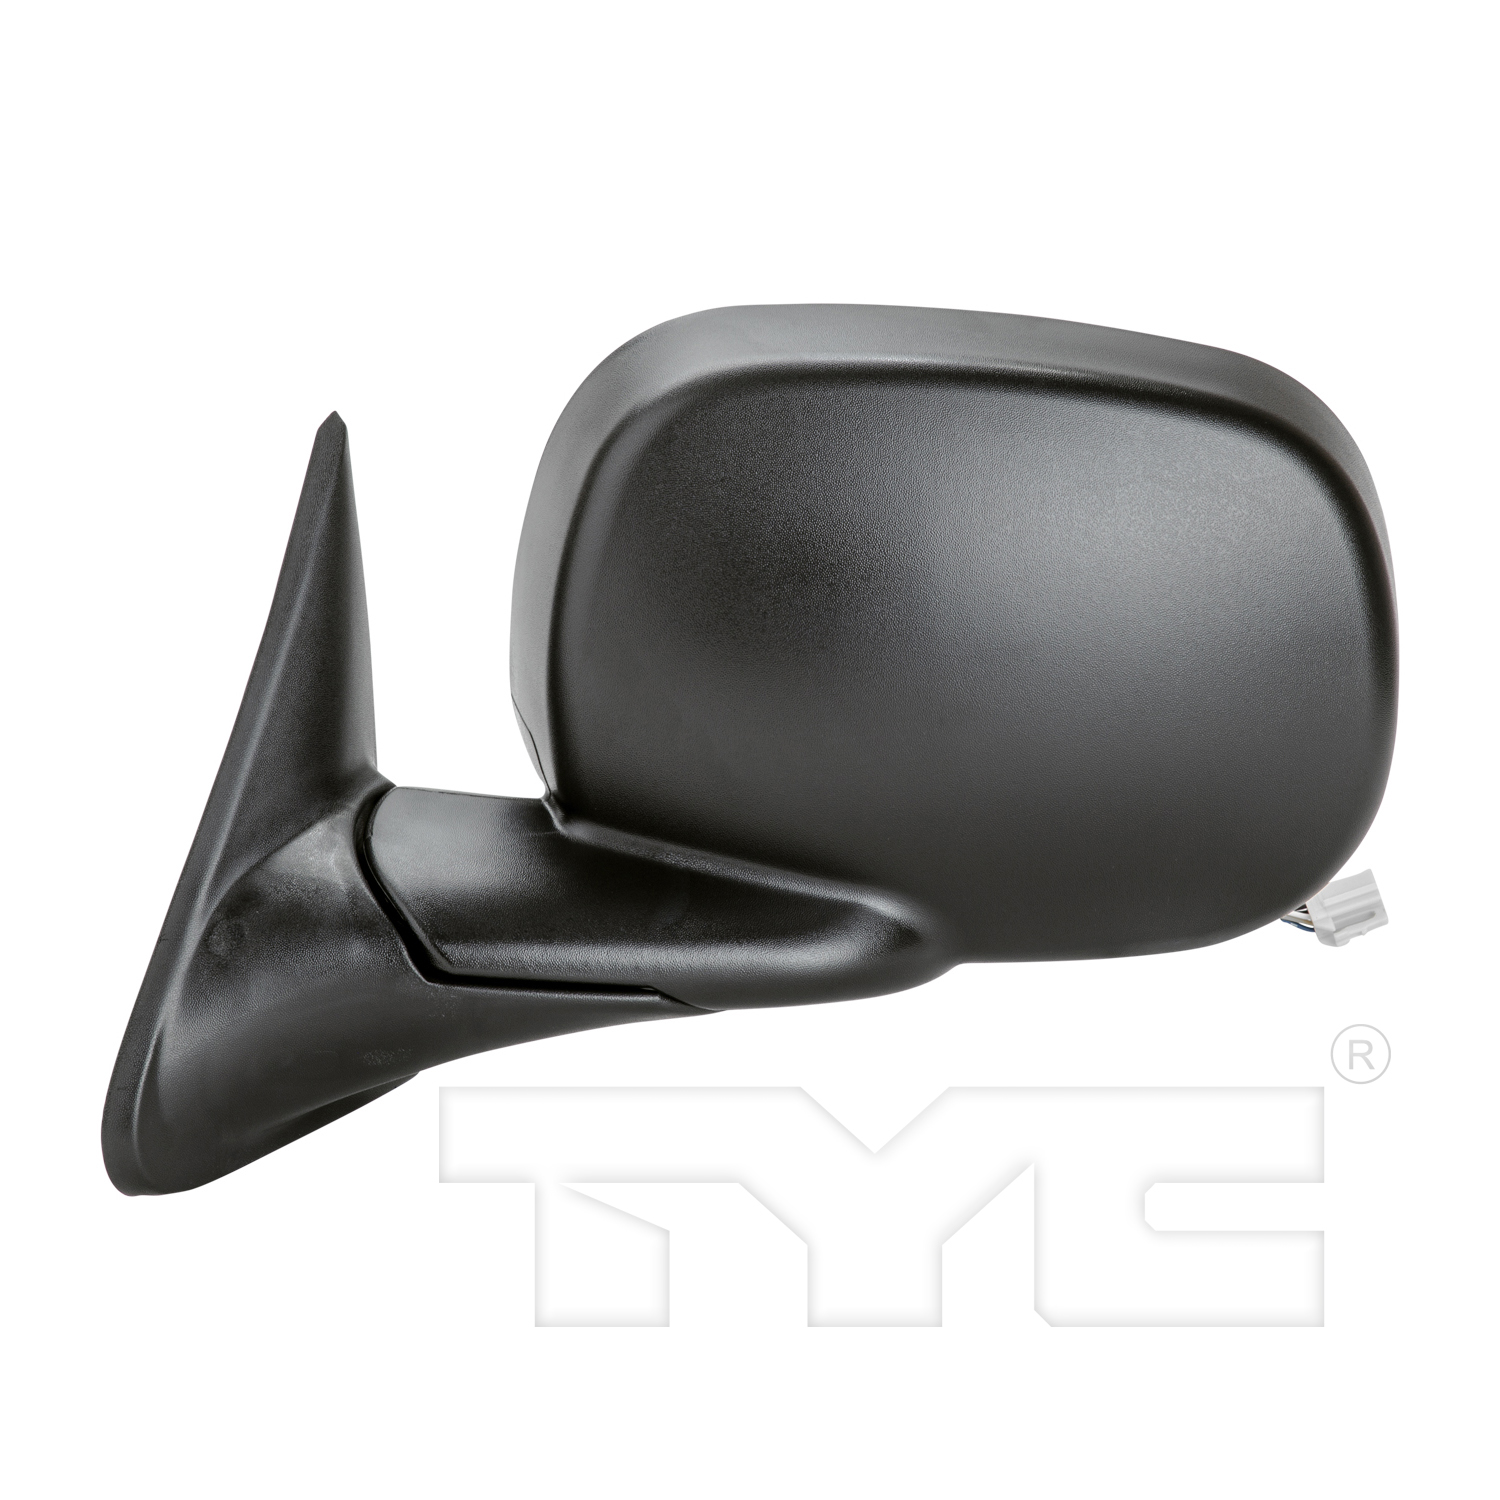 Aftermarket MIRRORS for DODGE - RAM 2500, RAM 2500,02-02,LT Mirror outside rear view